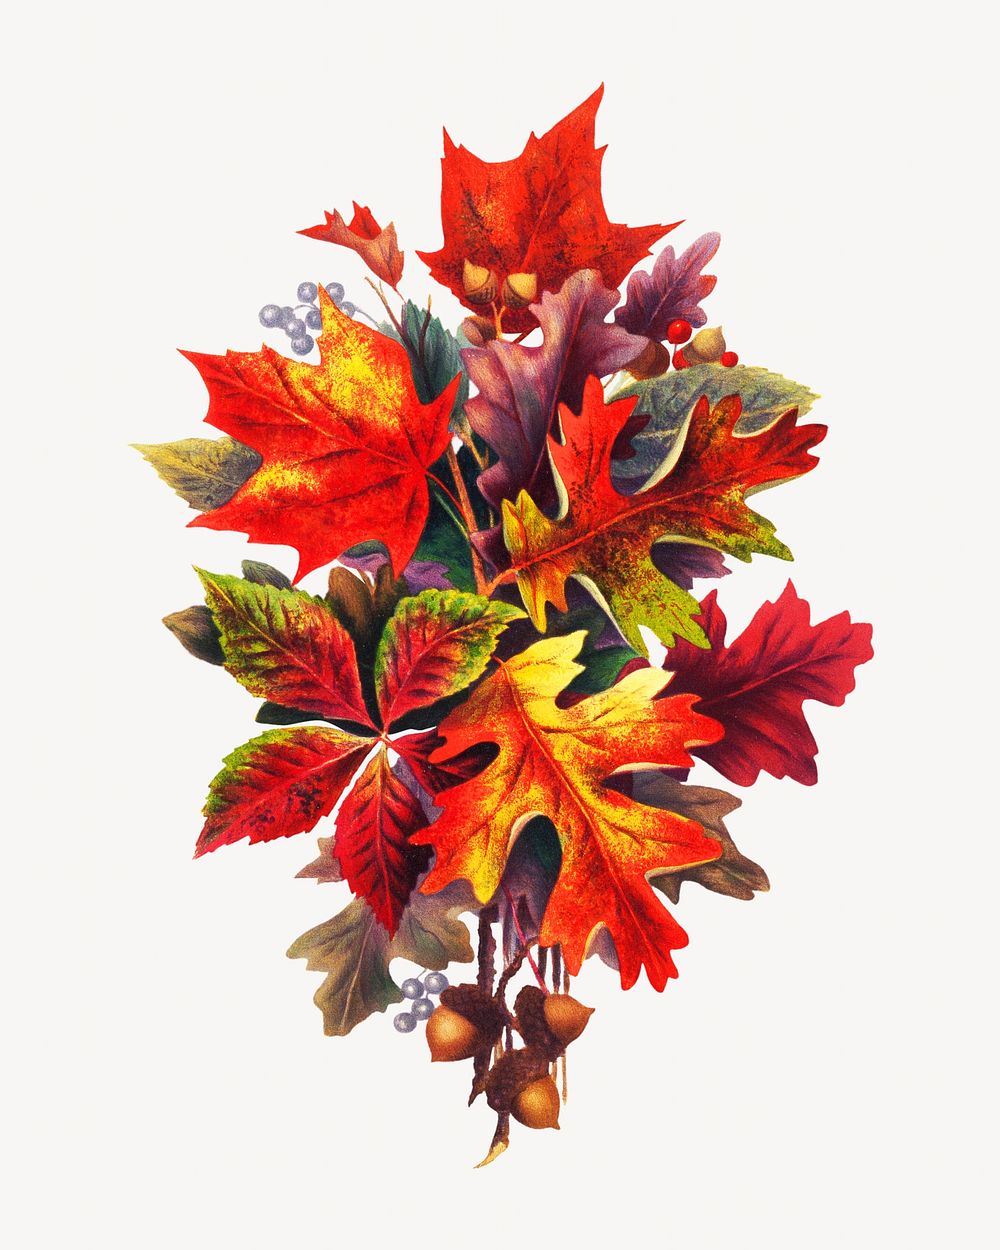 Autumn leaves, vintage botanical illustration by S. L. Bush. Remixed by rawpixel.